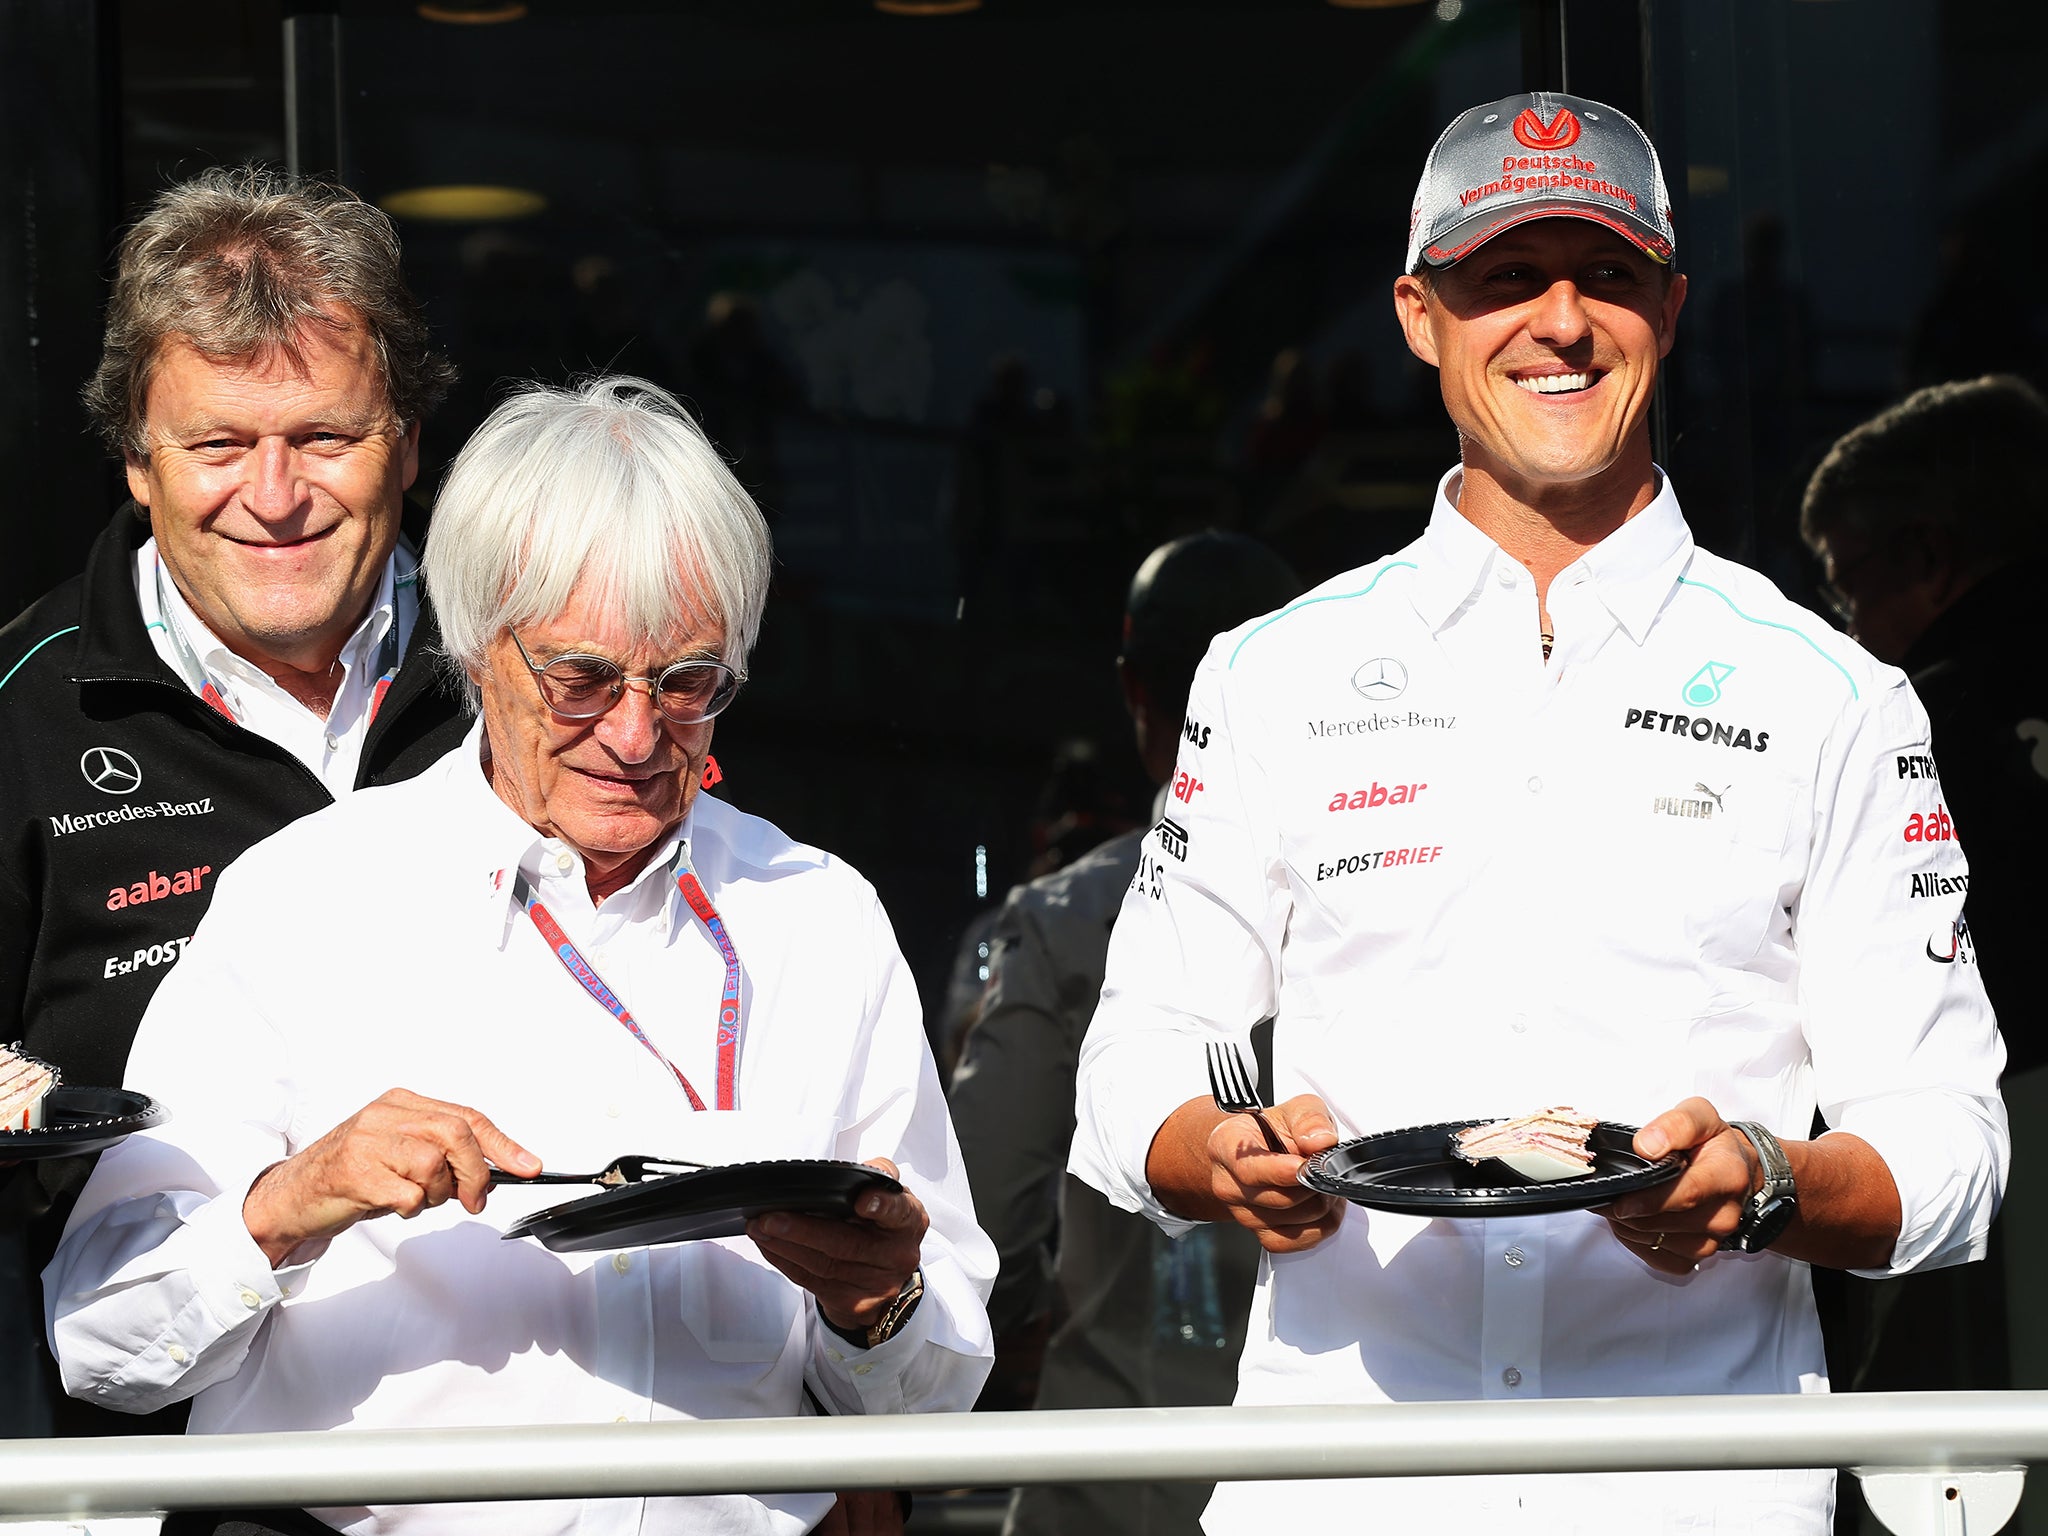 Ecclestone appeared at Schumacher's farewell party when he left Mercedes in 2012